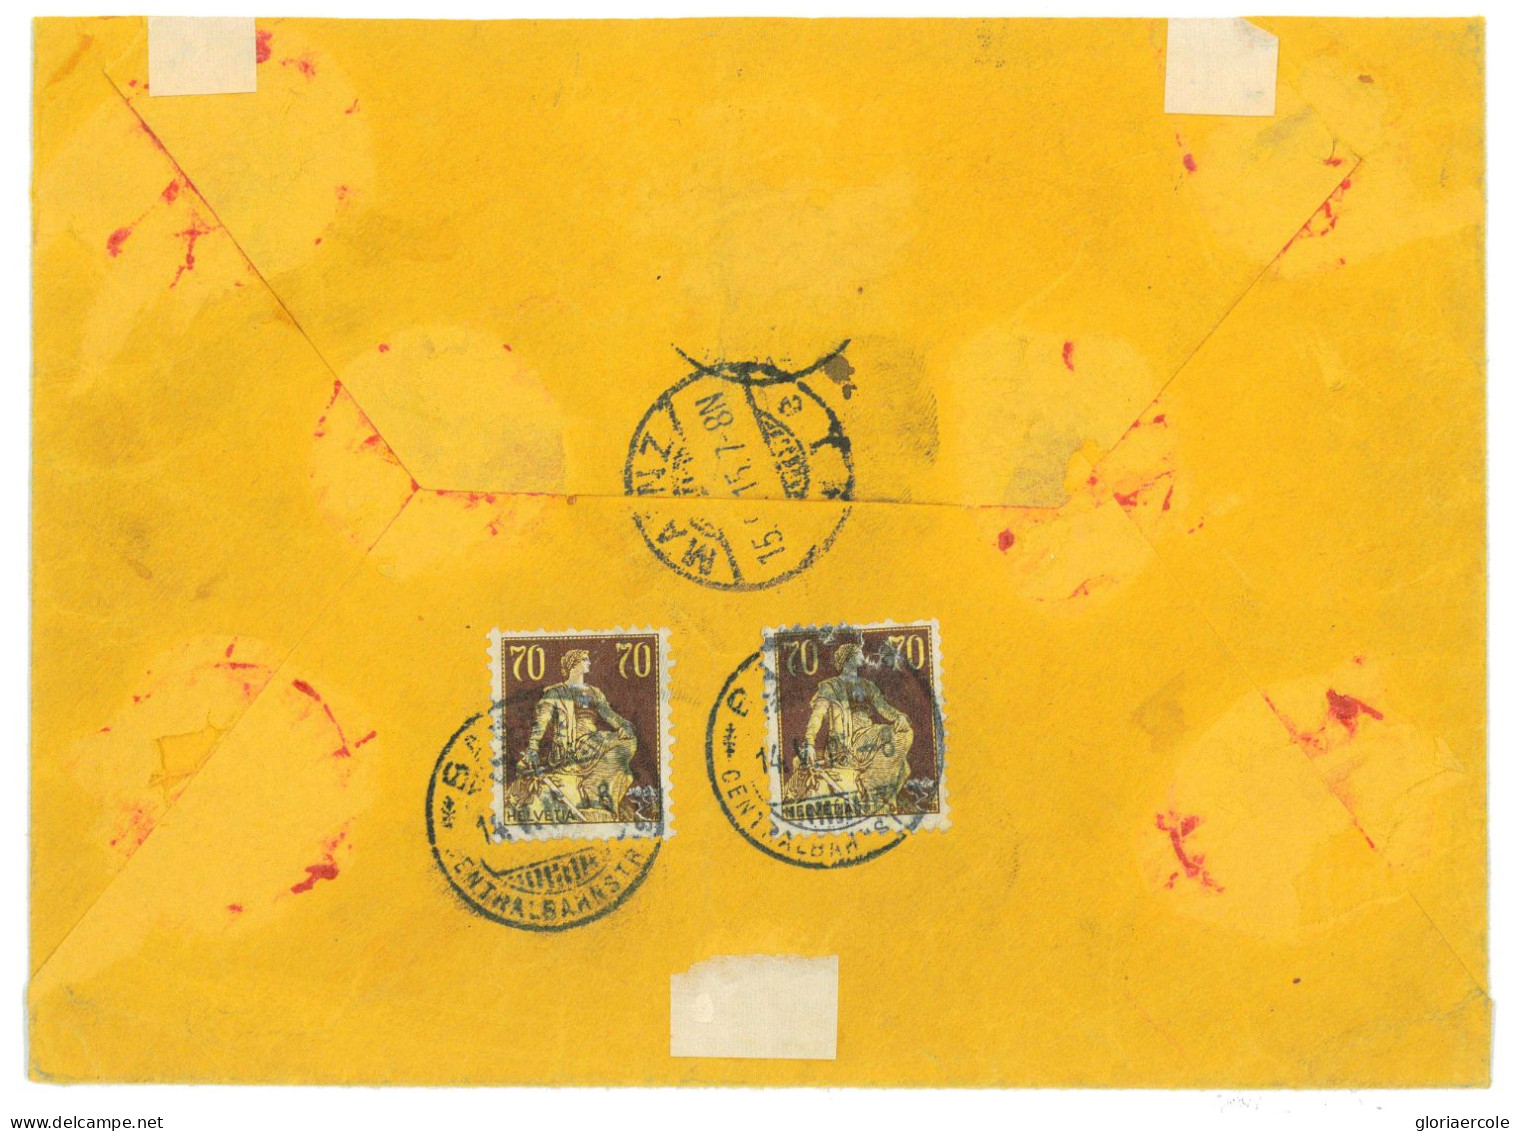 P3095 - SWITZERLAND NICE REGISTRED AND EXPRESS LETTER FROM BASEL, BEARING THE 10 FRANKS DEFINITIVE SBHV 131 ON THE FRONT - Cartas & Documentos